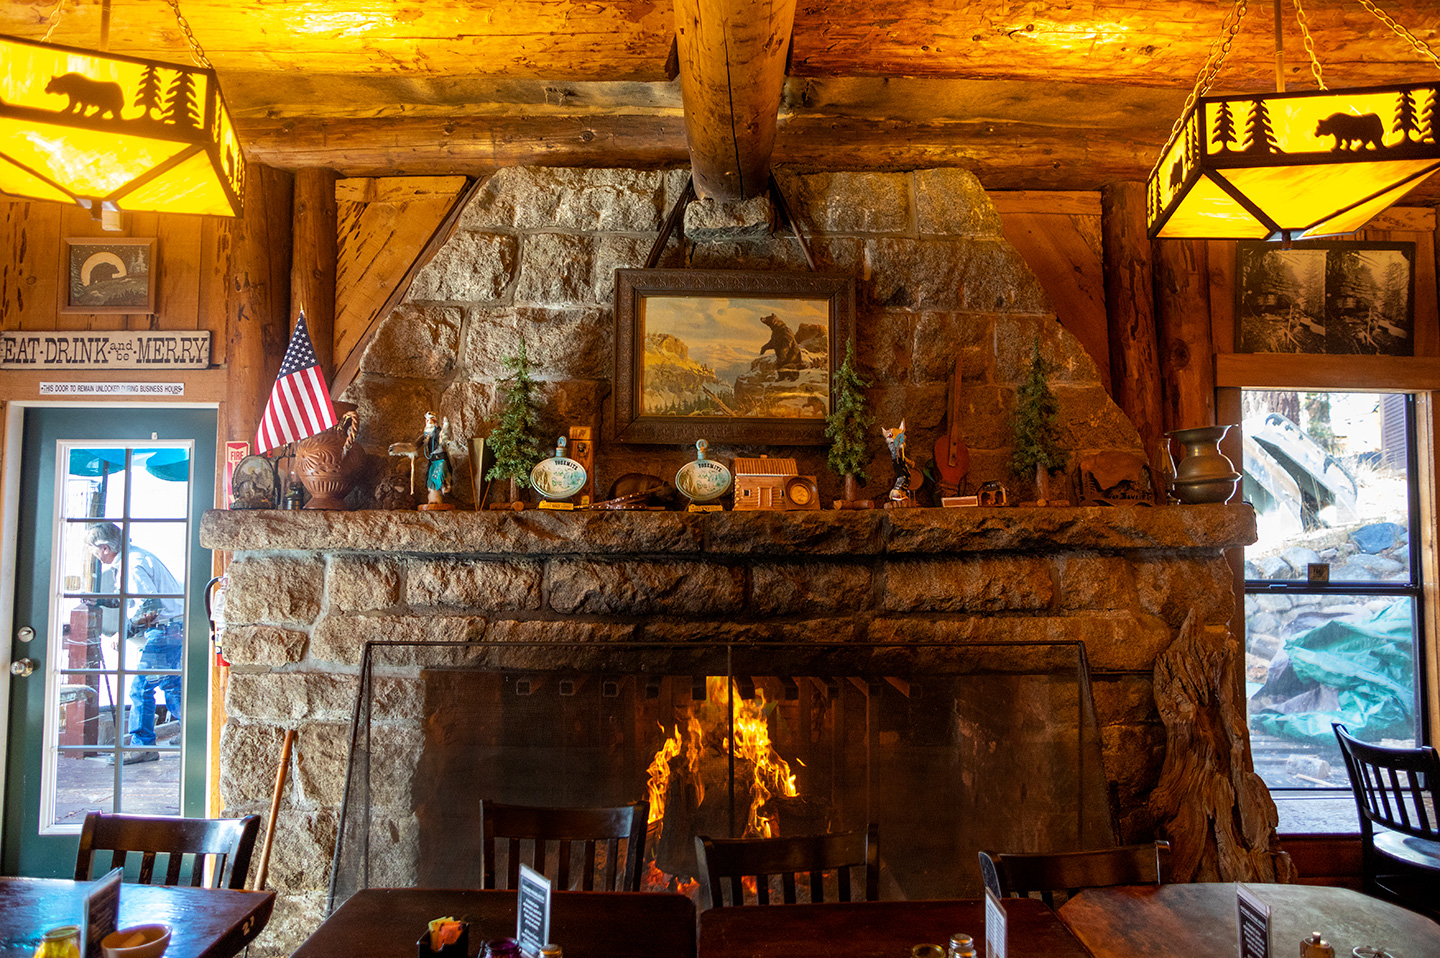 The very large dining room fireplace of the lodge